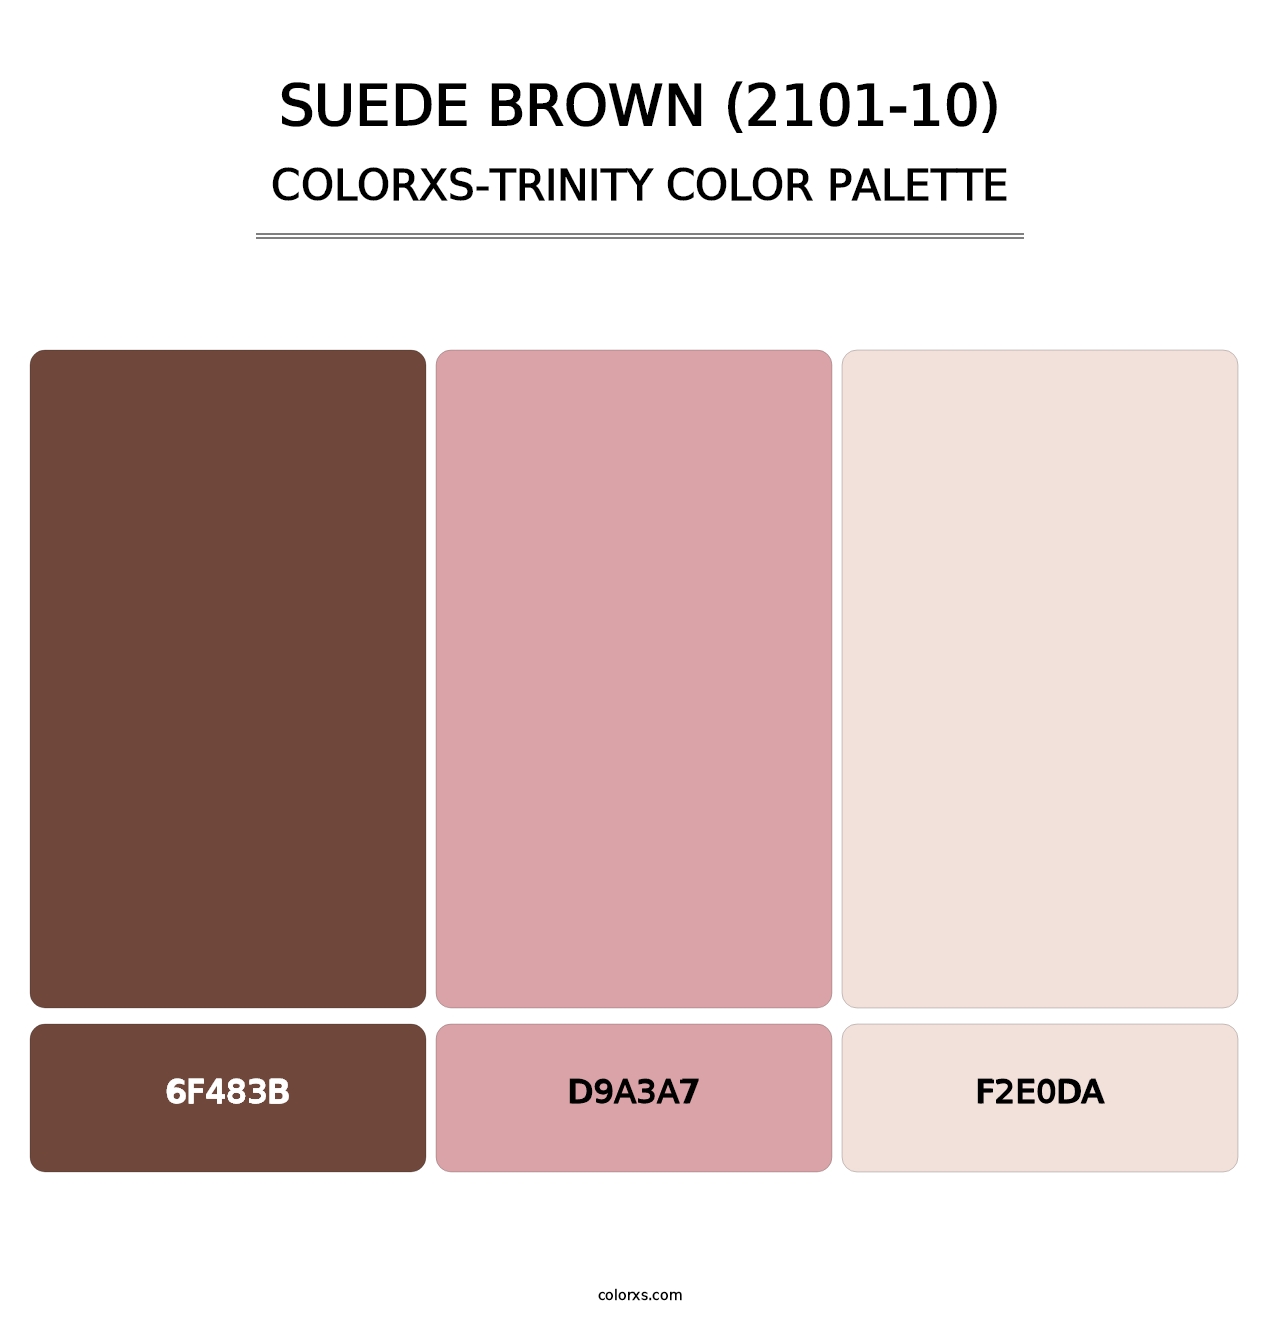 Suede Brown (2101-10) - Colorxs Trinity Palette